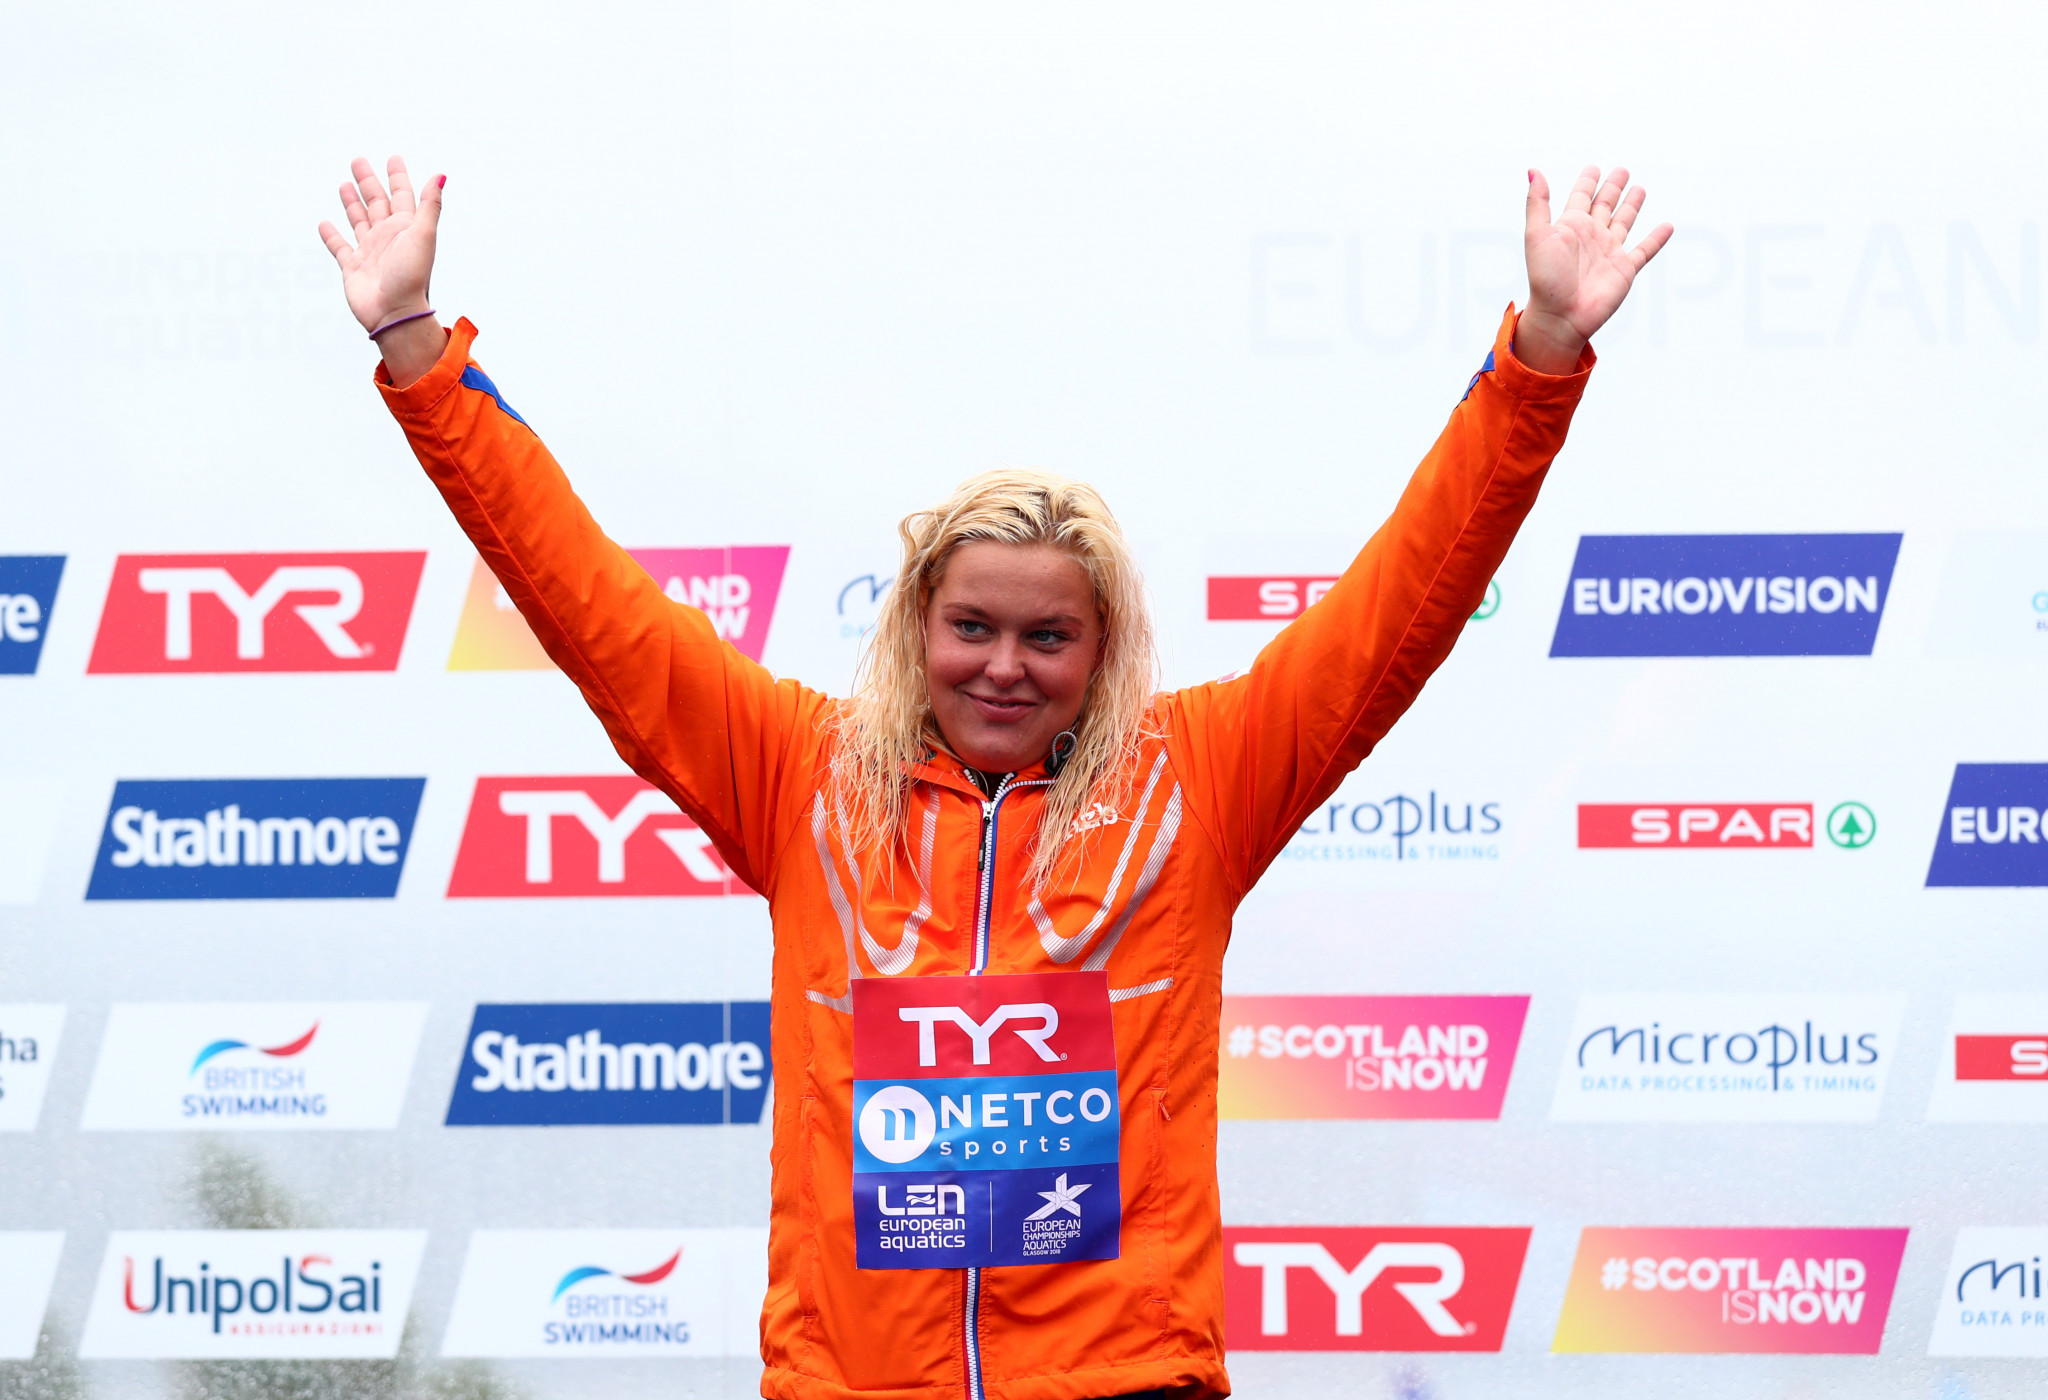 The winner of last year's race in Doha, Sharon van Rouwendaal of The Netherlands, is back to defend her title ©Getty Images